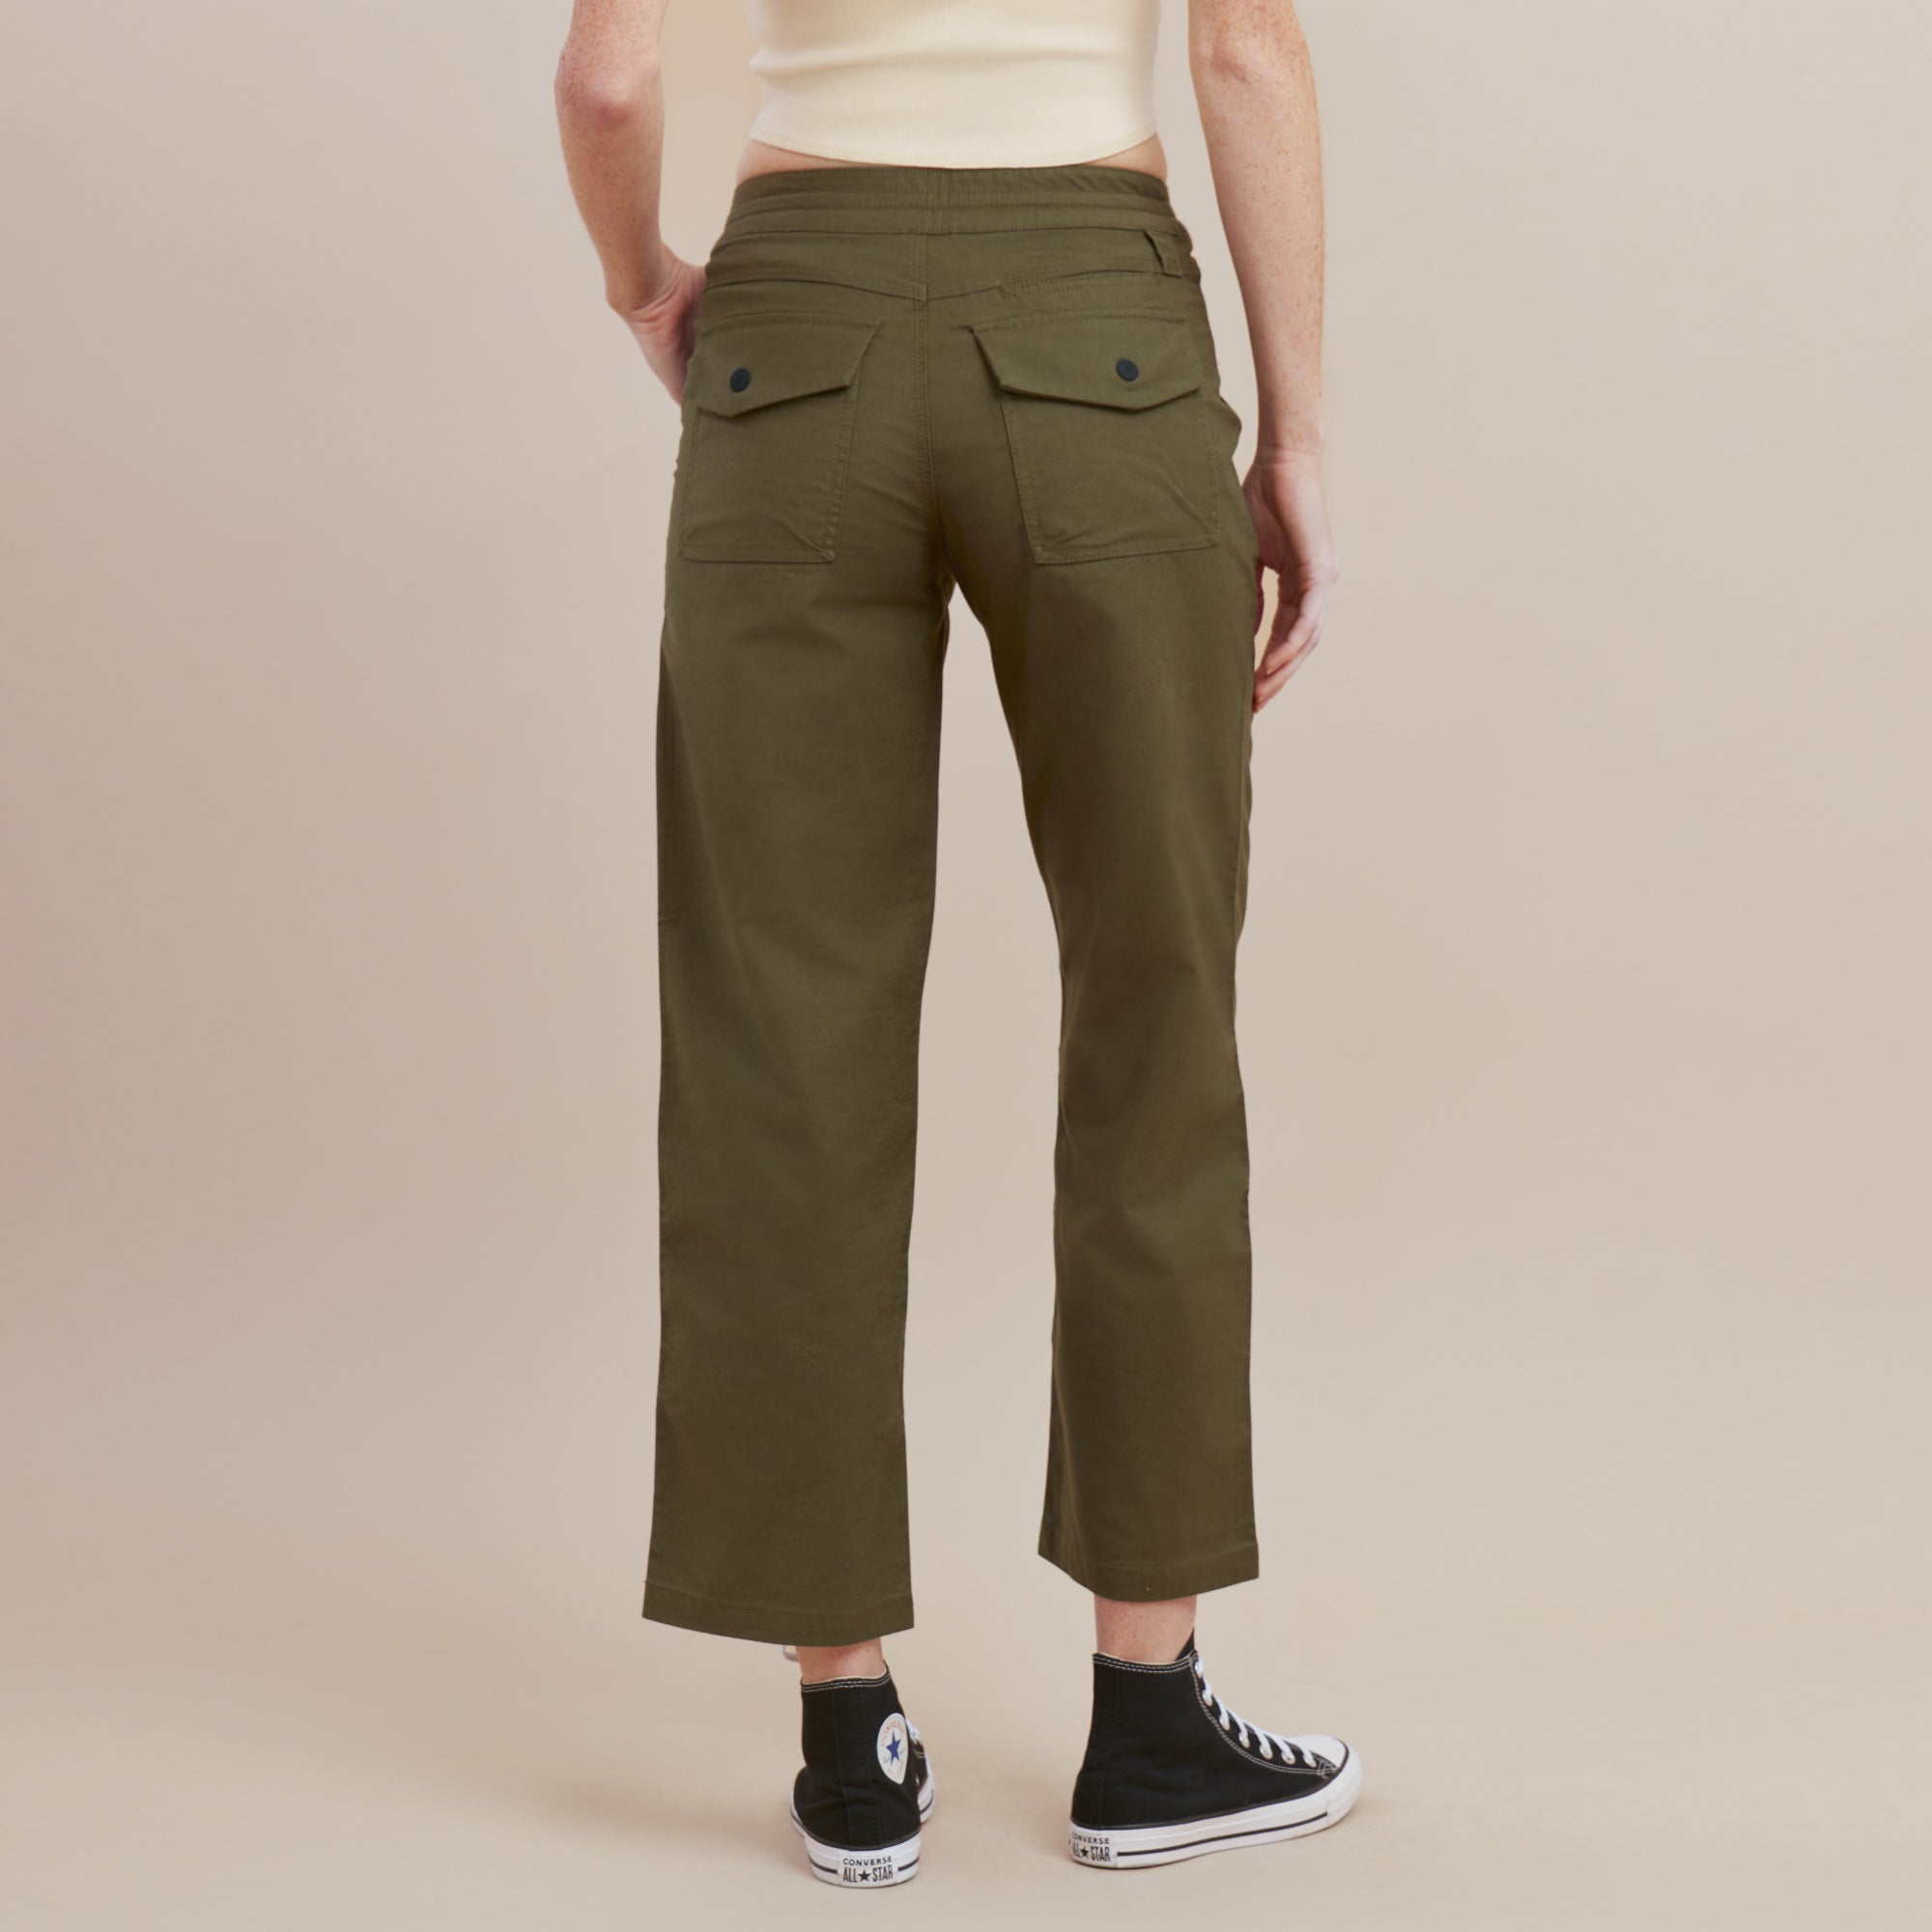 TOMMY HILFIGER | Military green Men's Casual Pants | YOOX